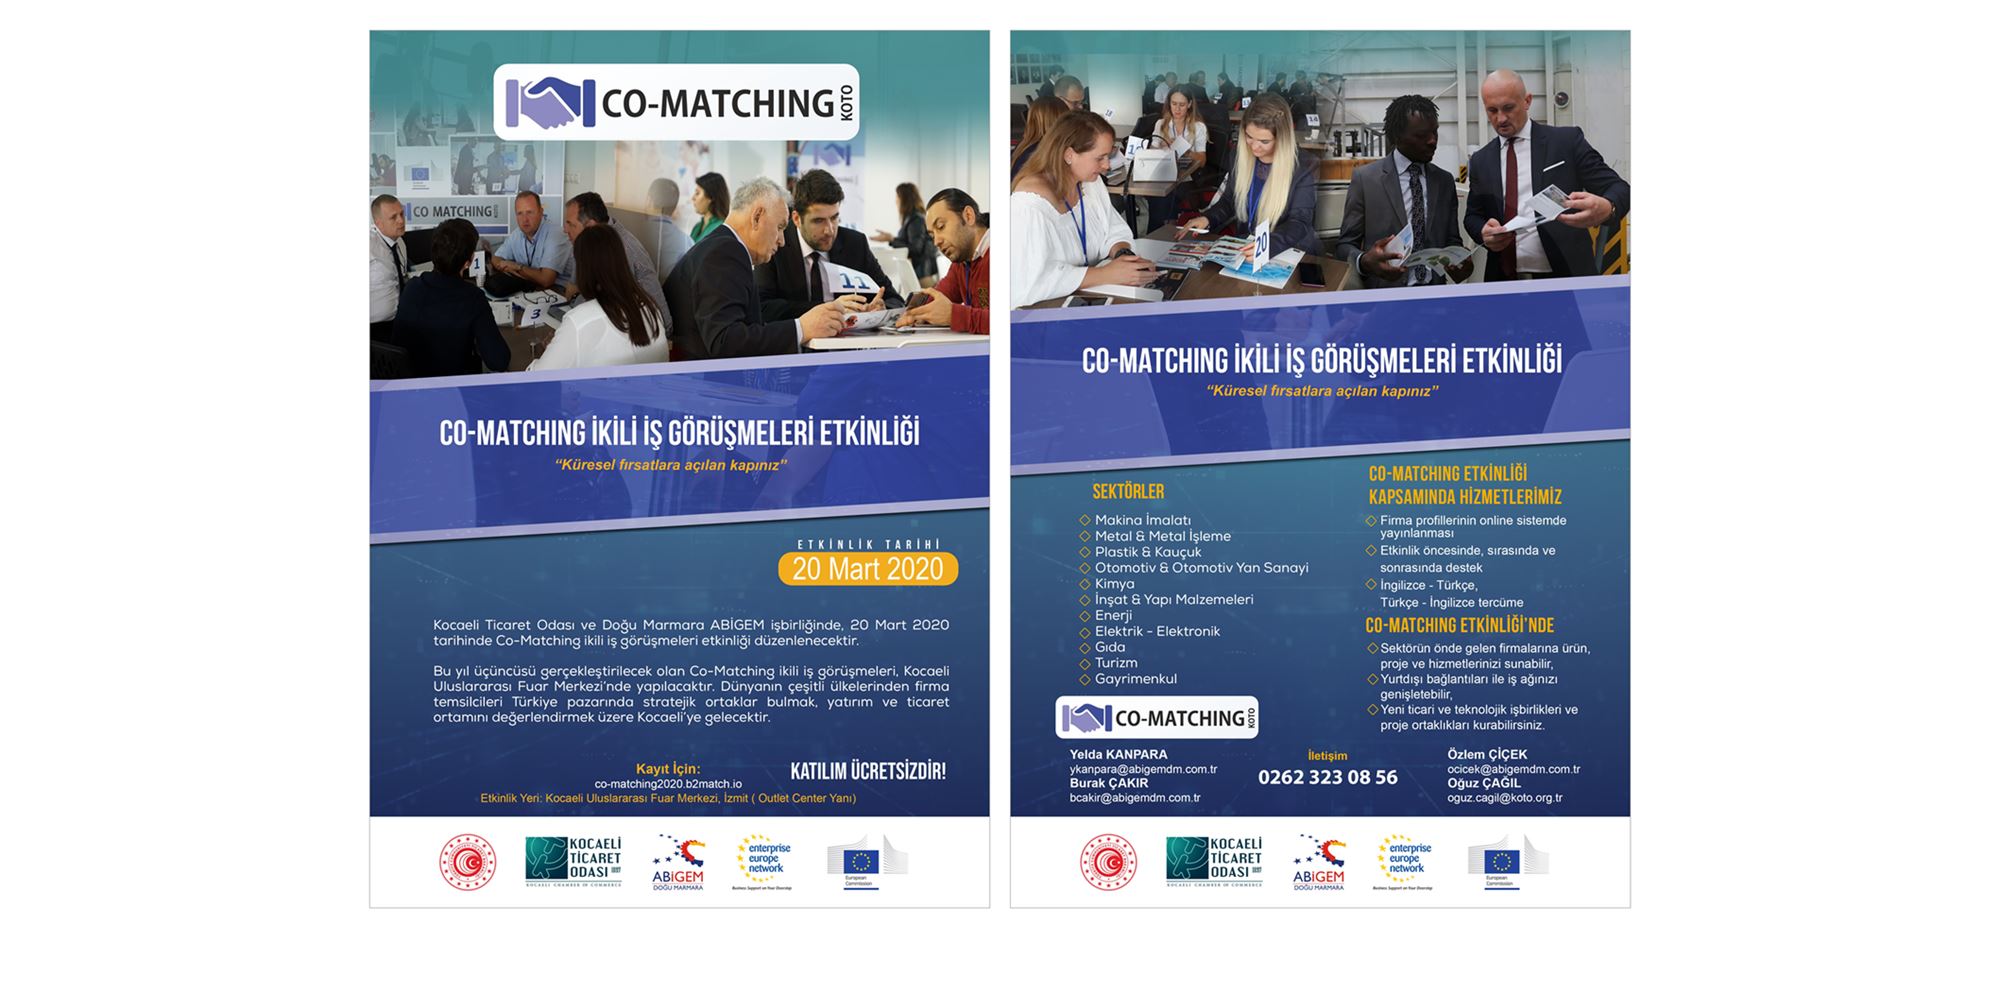 Co-Matching Business Matchmaking Event 	(19th-20th March 2020)